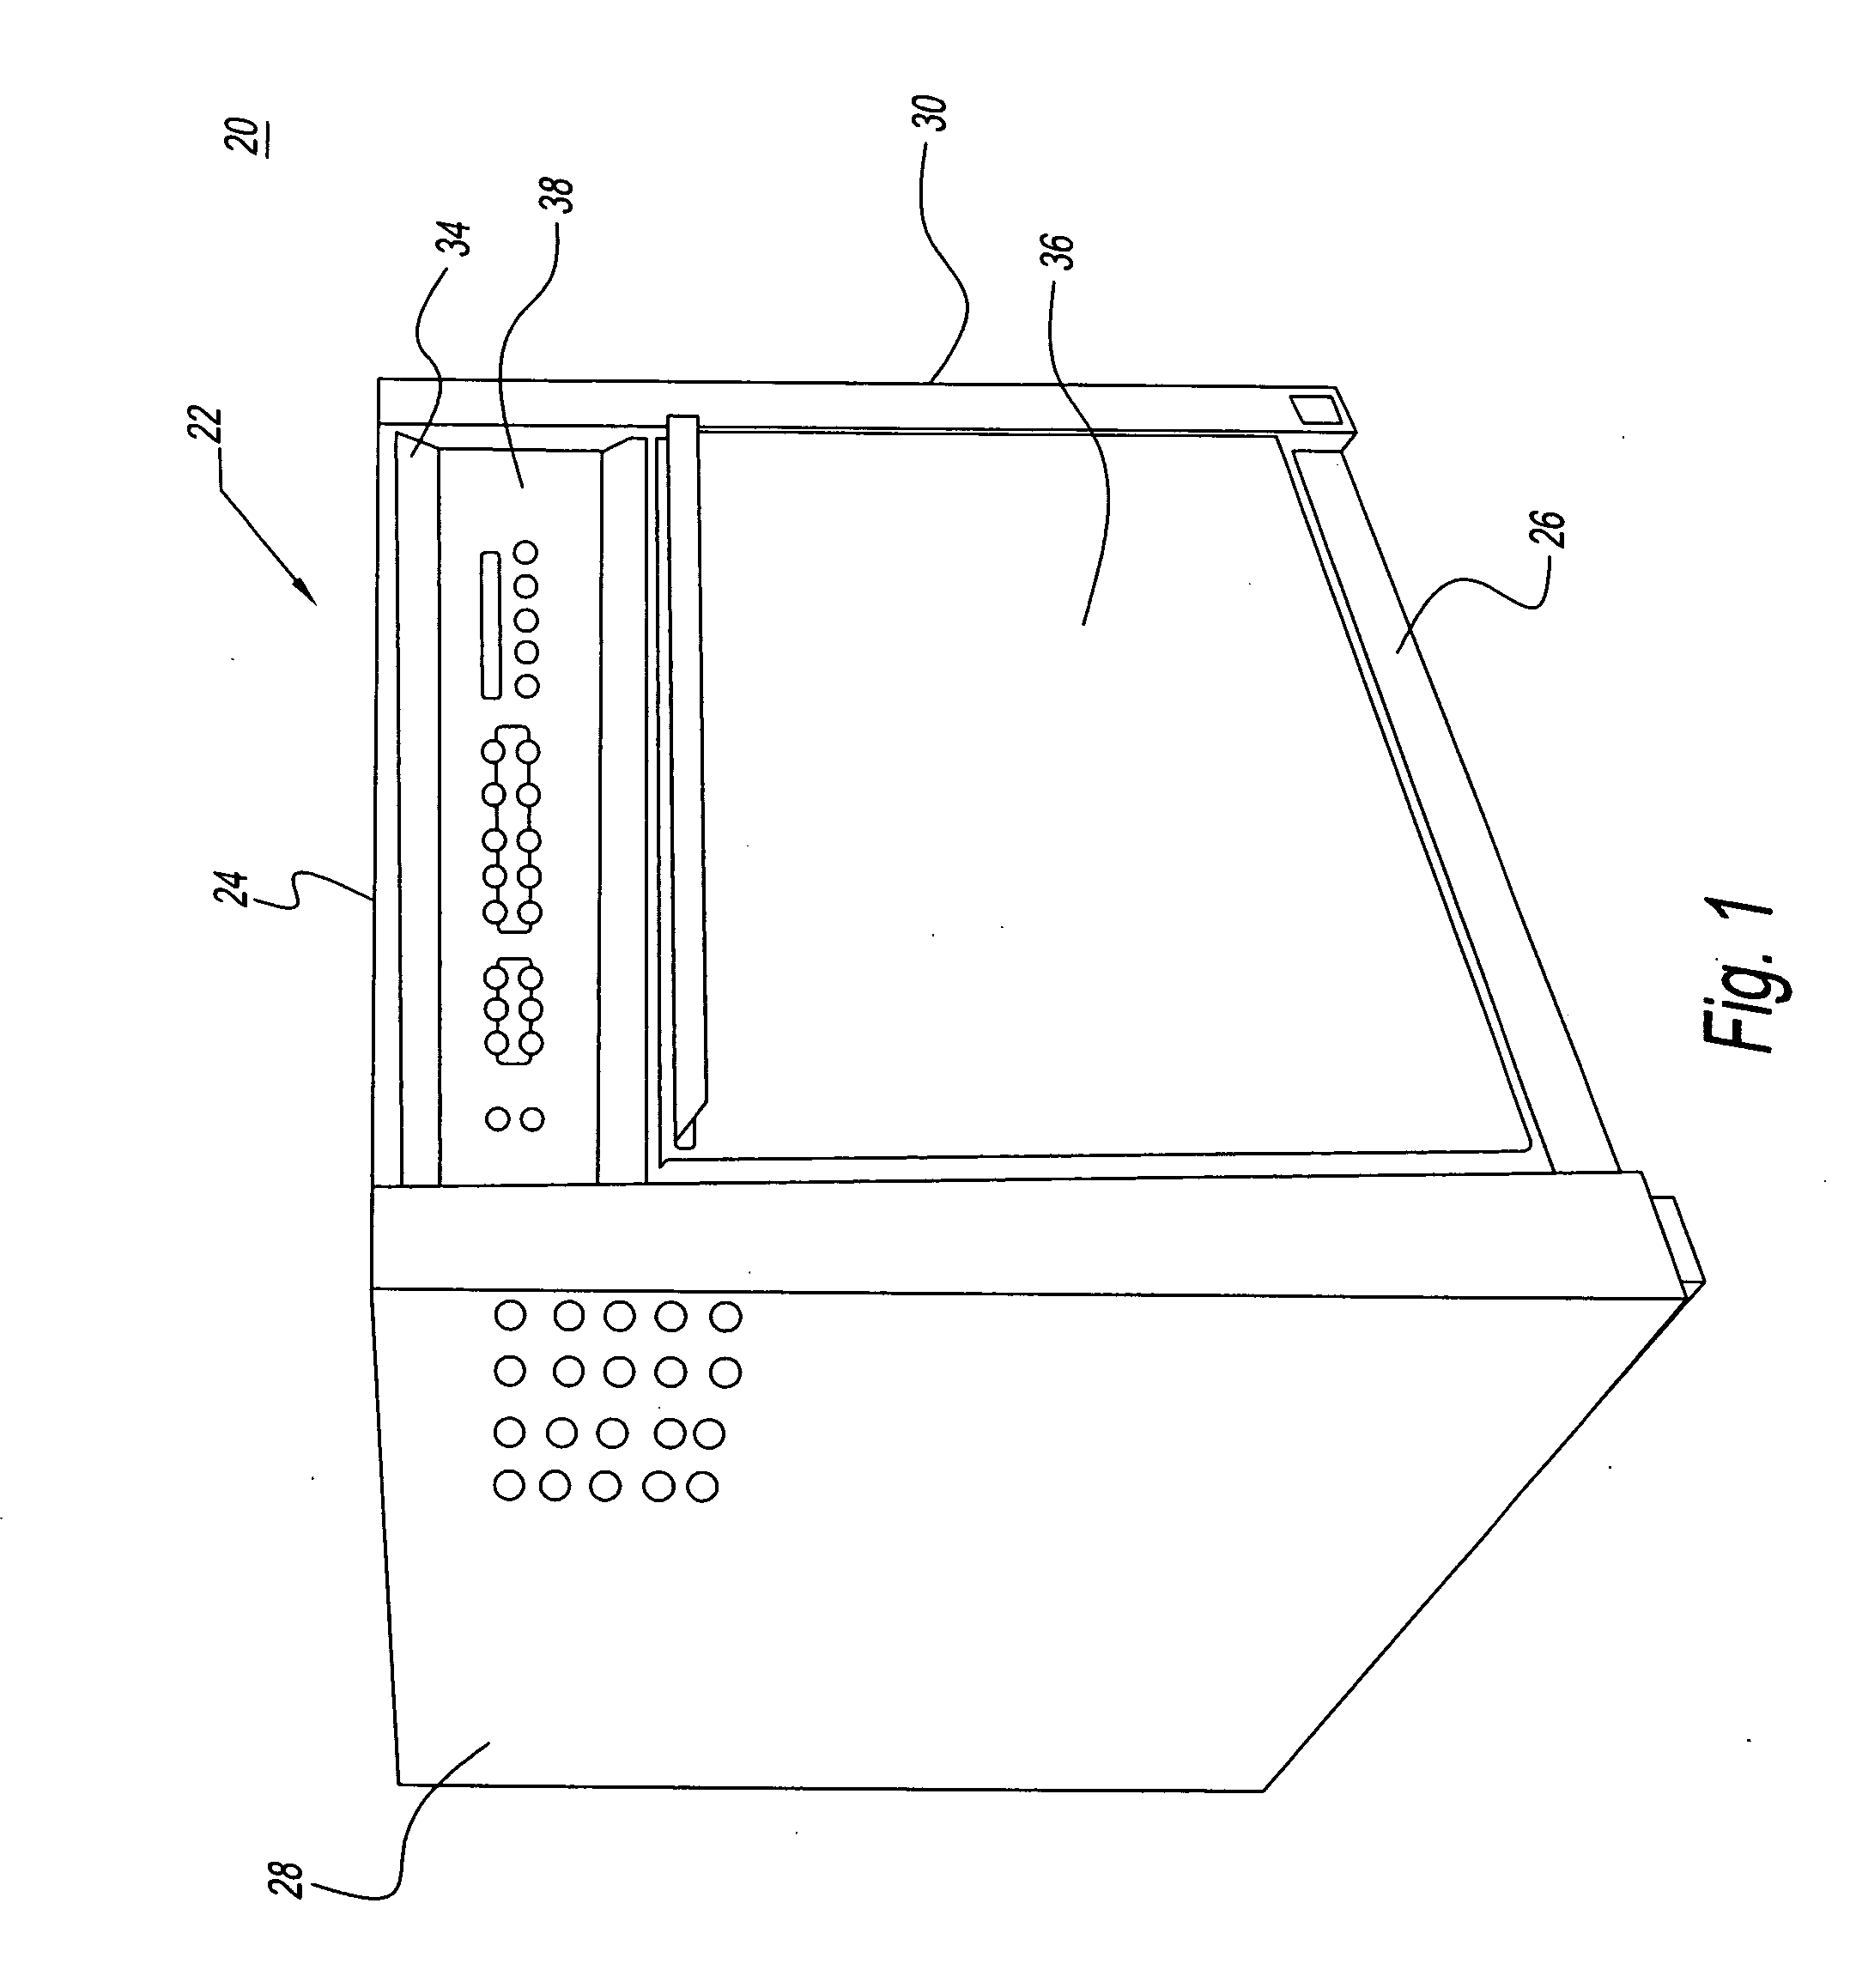 Cooking device with smoke and odor abatement